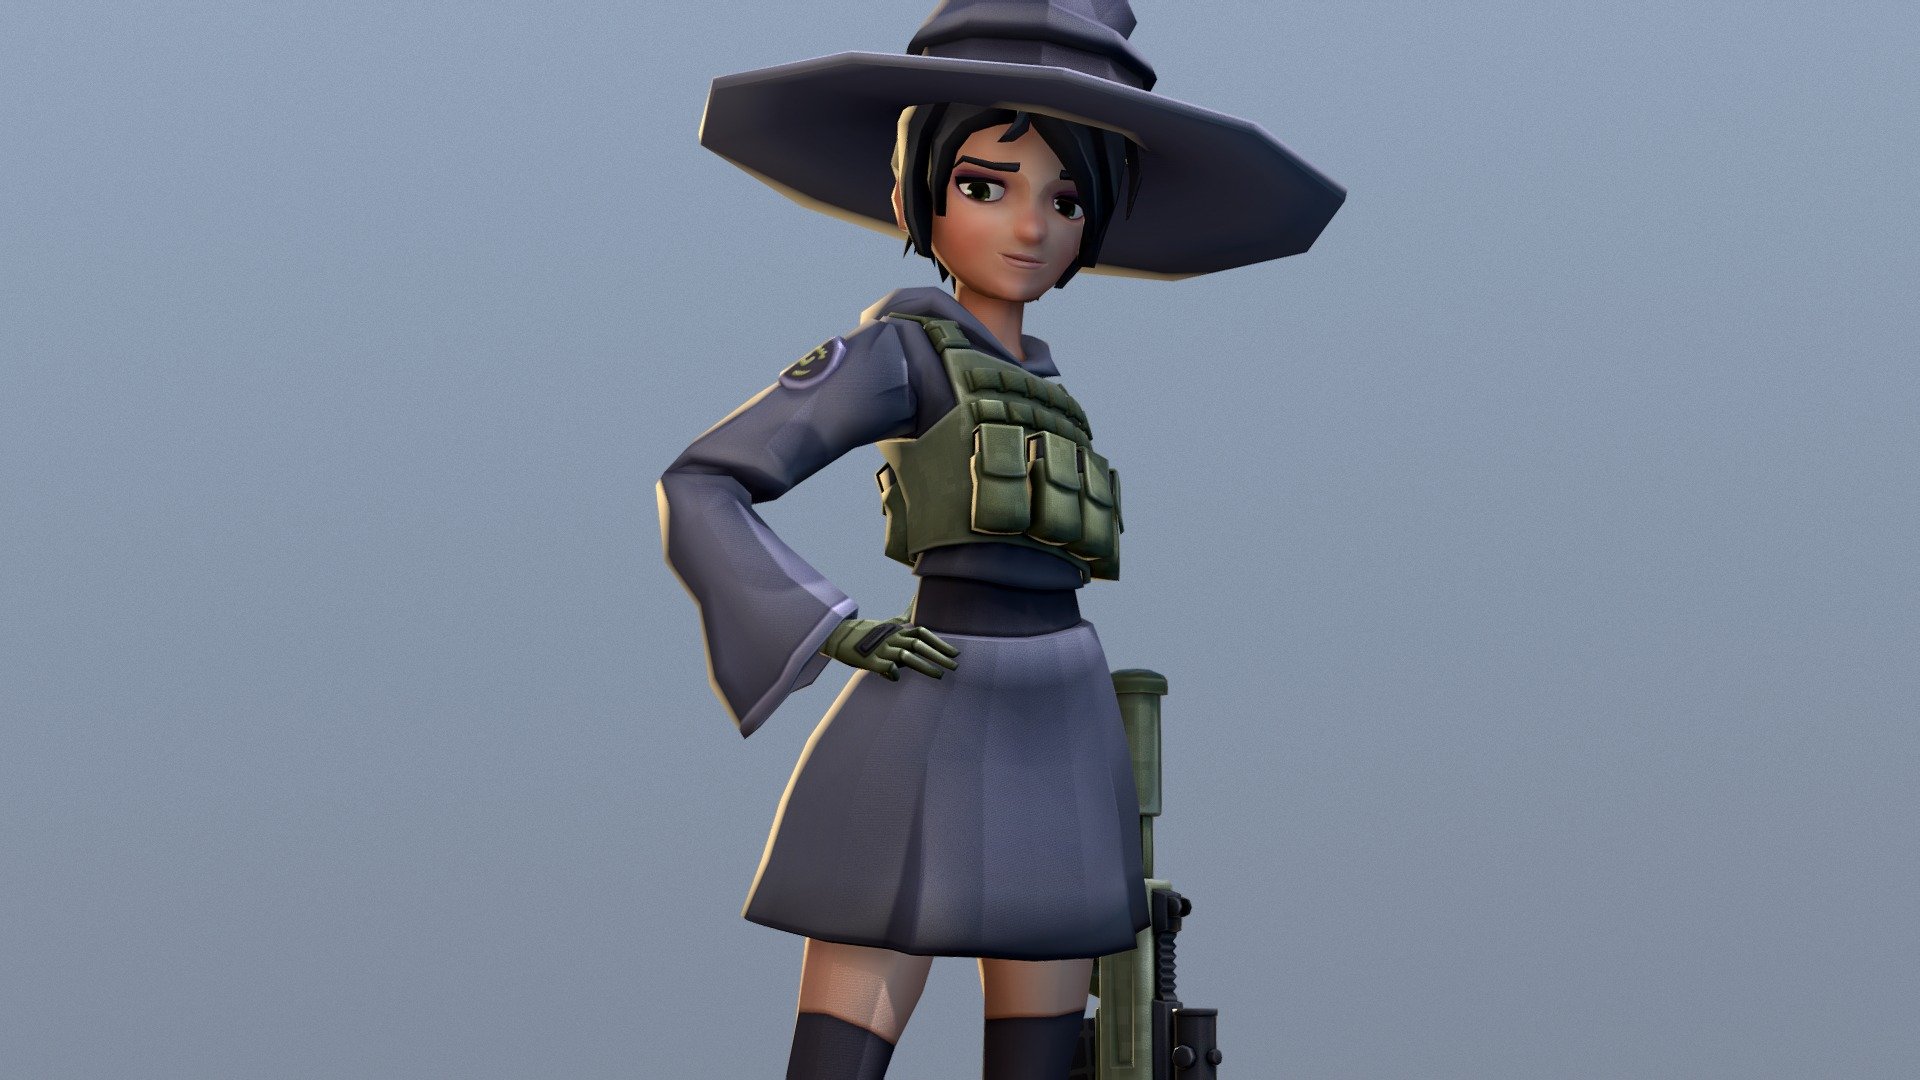 Made this little witch to keep practicing and learning^^
Original concept by: https://twitter.com/kobalt_blu/status/939032996132265984

Don't forget to check the artstation project for more about her + some cute renders!
 https://www.artstation.com/p/enNXb - Witchy - 3D model by pot4tochip (@andyvargas) 3d model